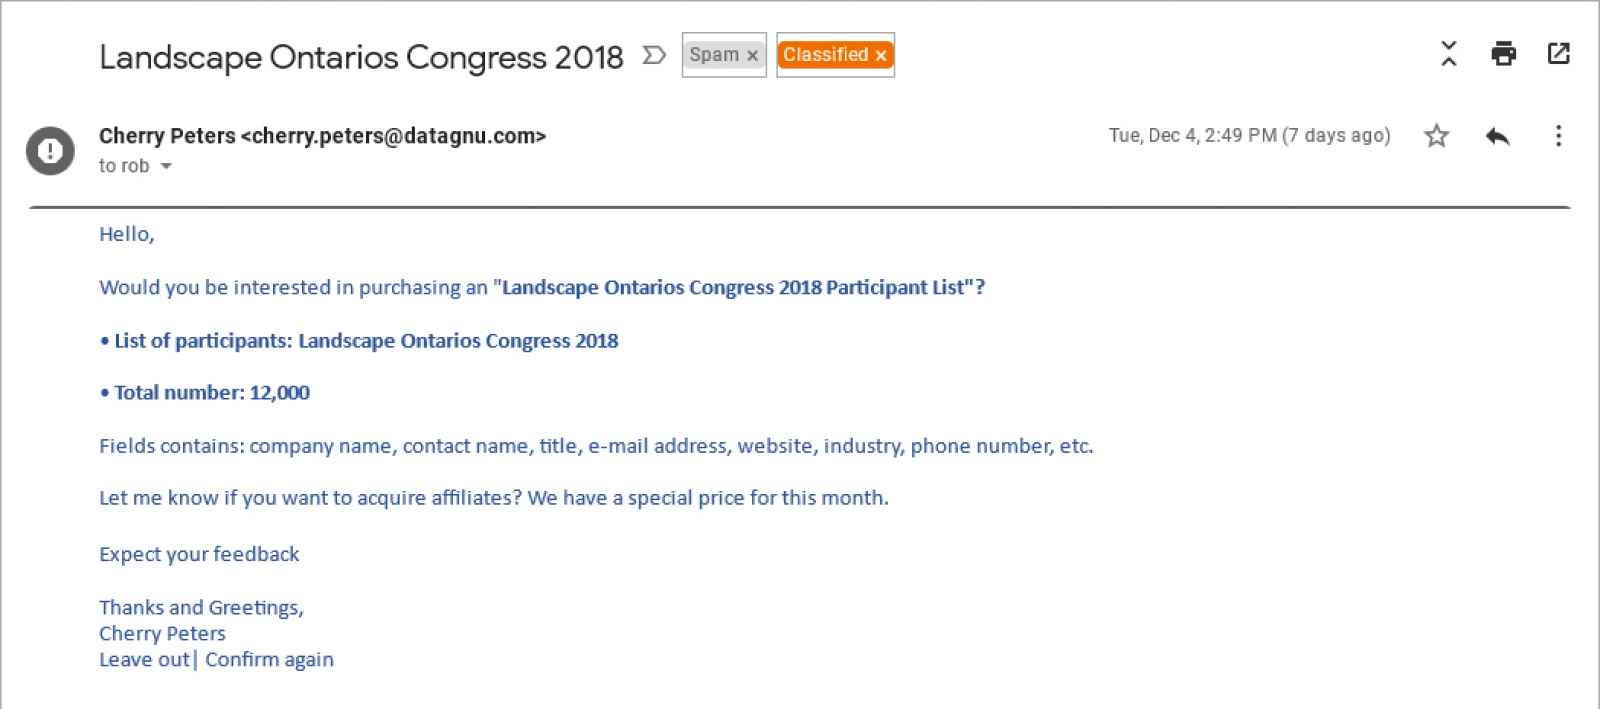 Email messages offering Congress lists are not from Landscape Ontario